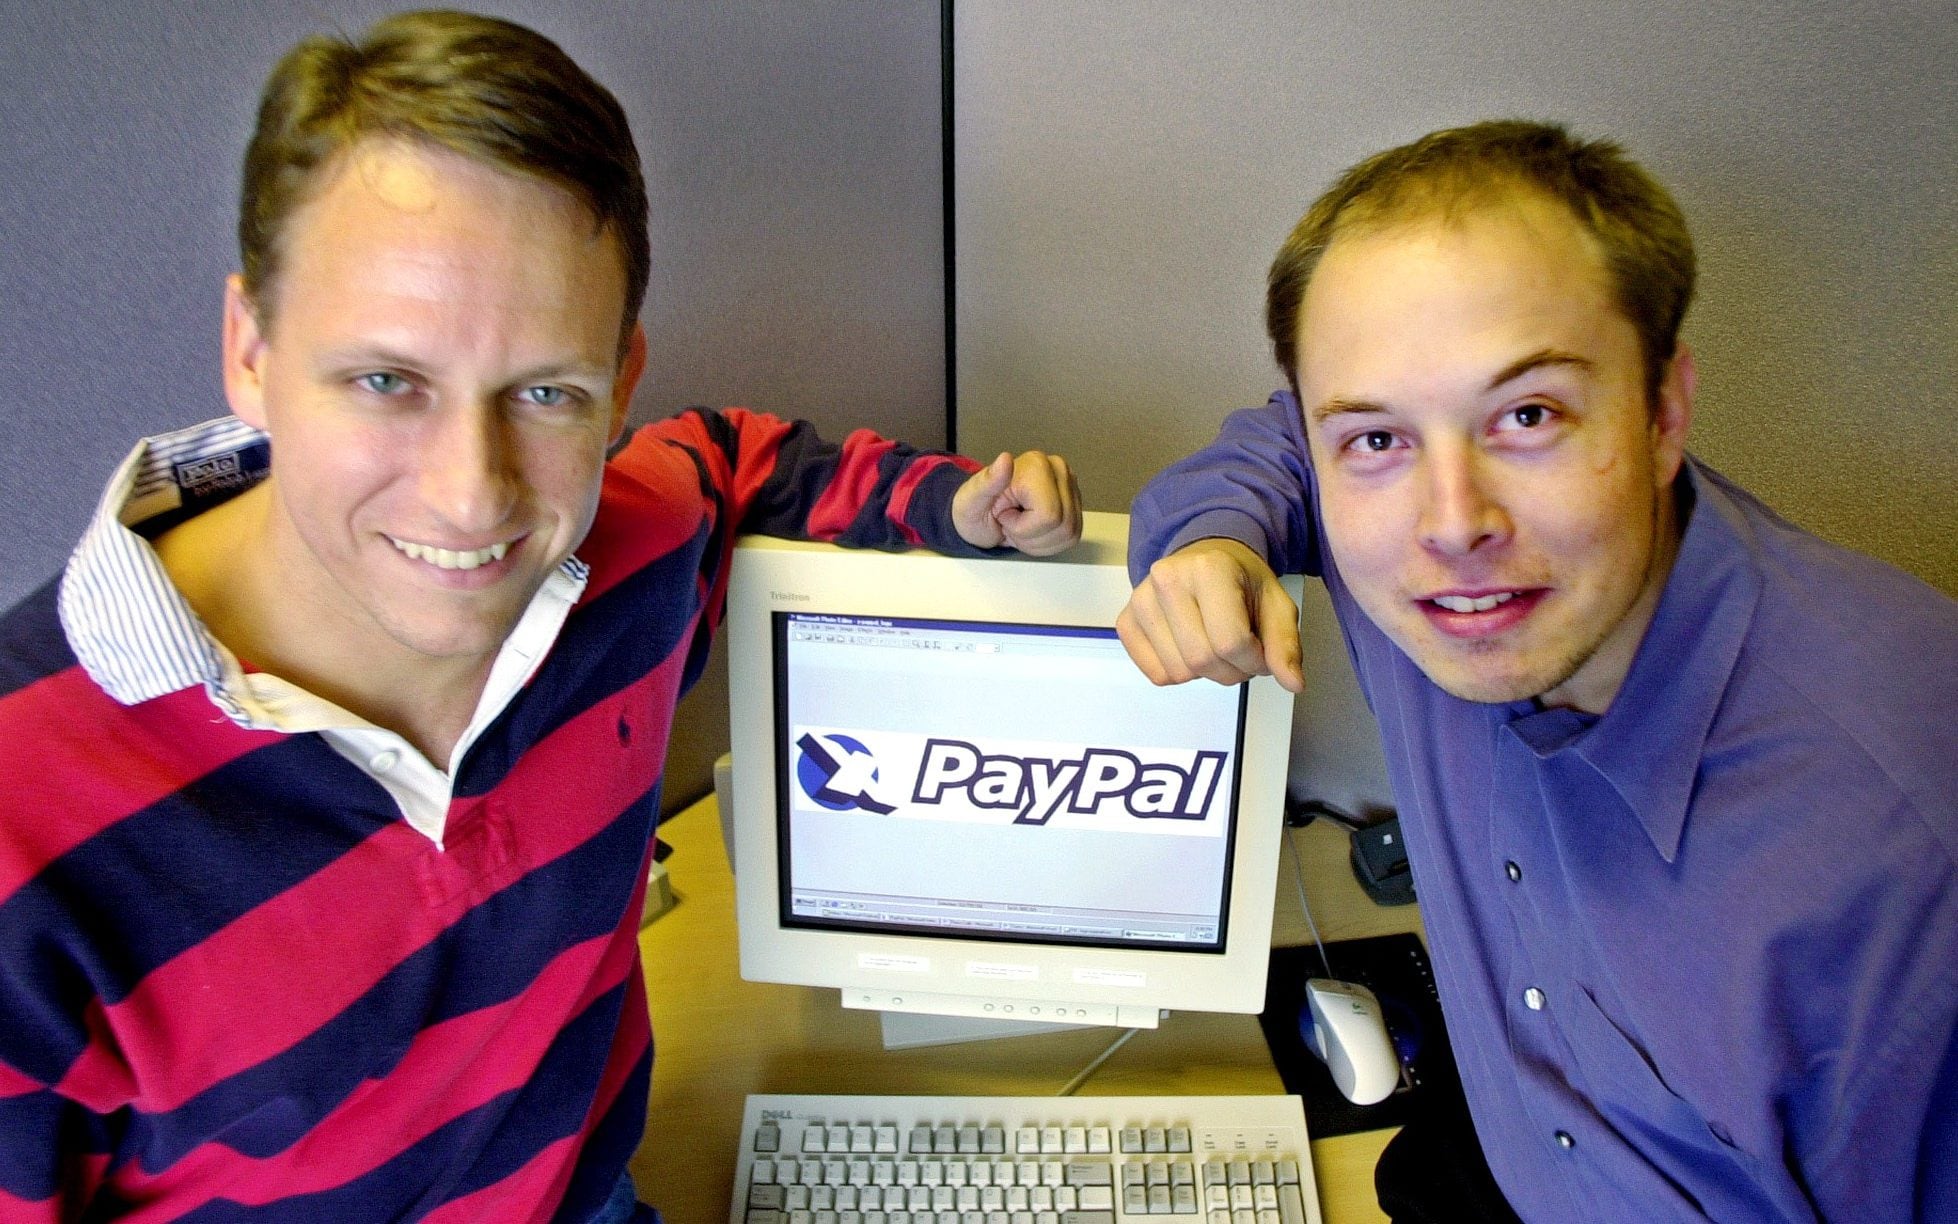 David Sacks and Elon Musk Holding A Computer With Paypal Flashed On Screen